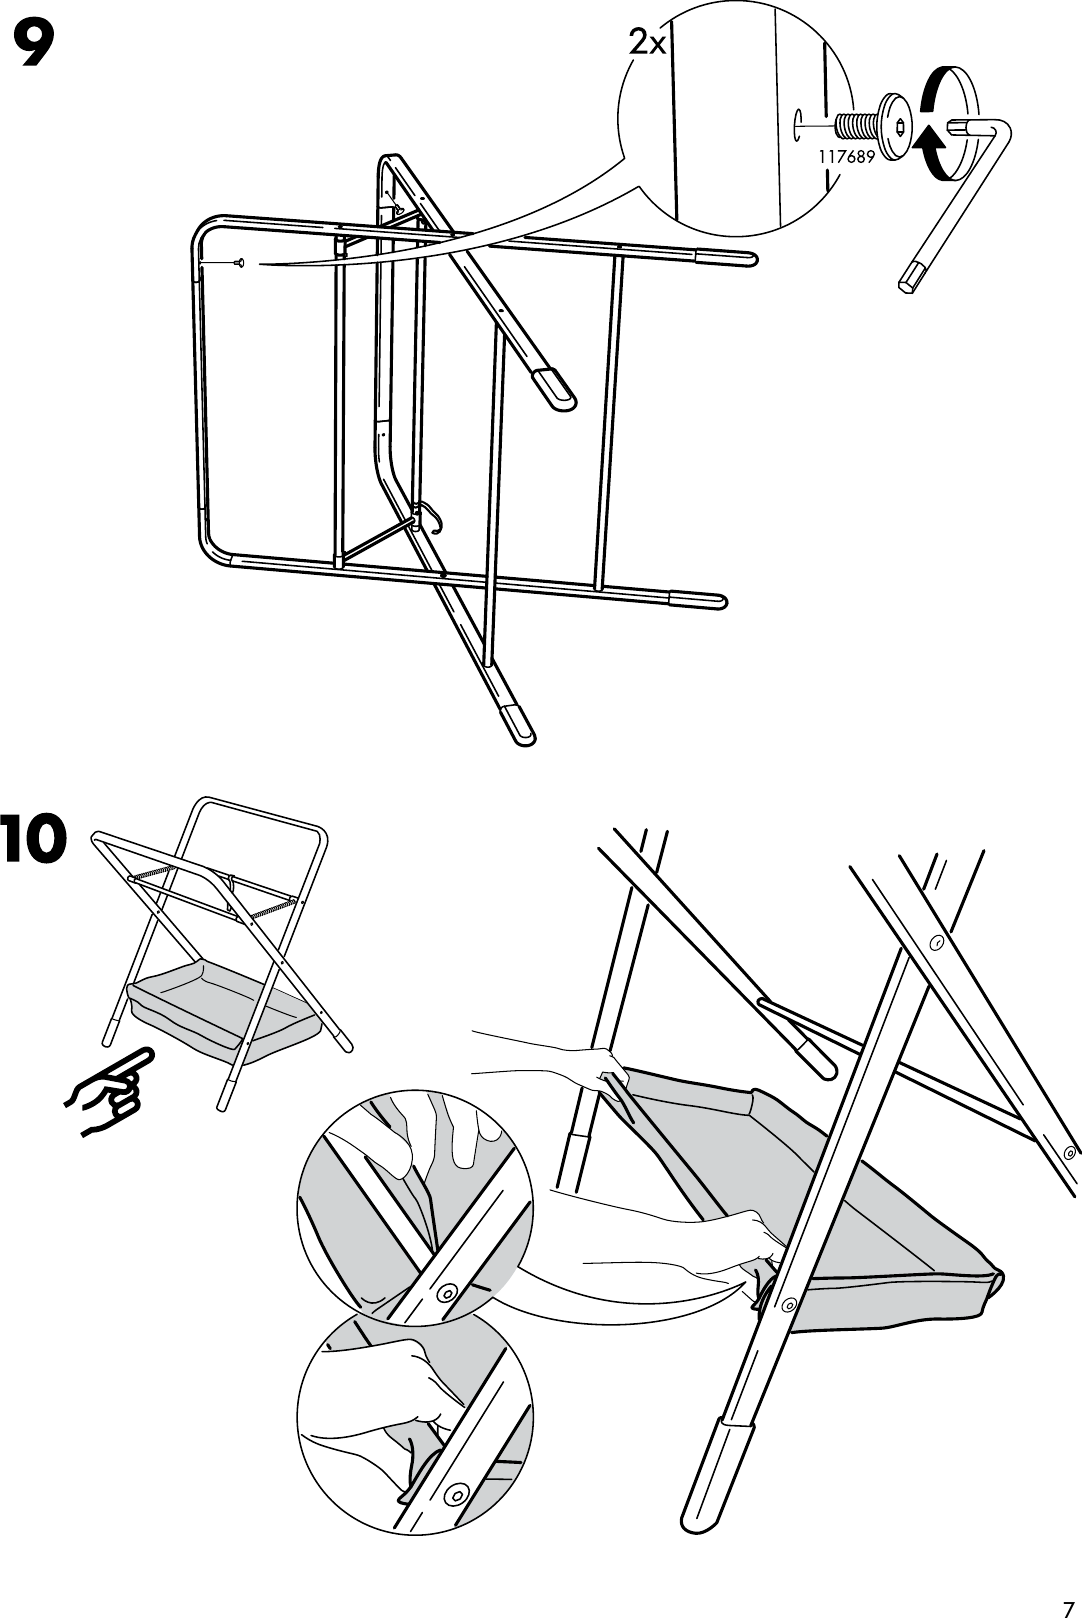 Page 7 of 12 - Ikea Ikea-Spoling-Changing-Table-Assembly-Instruction